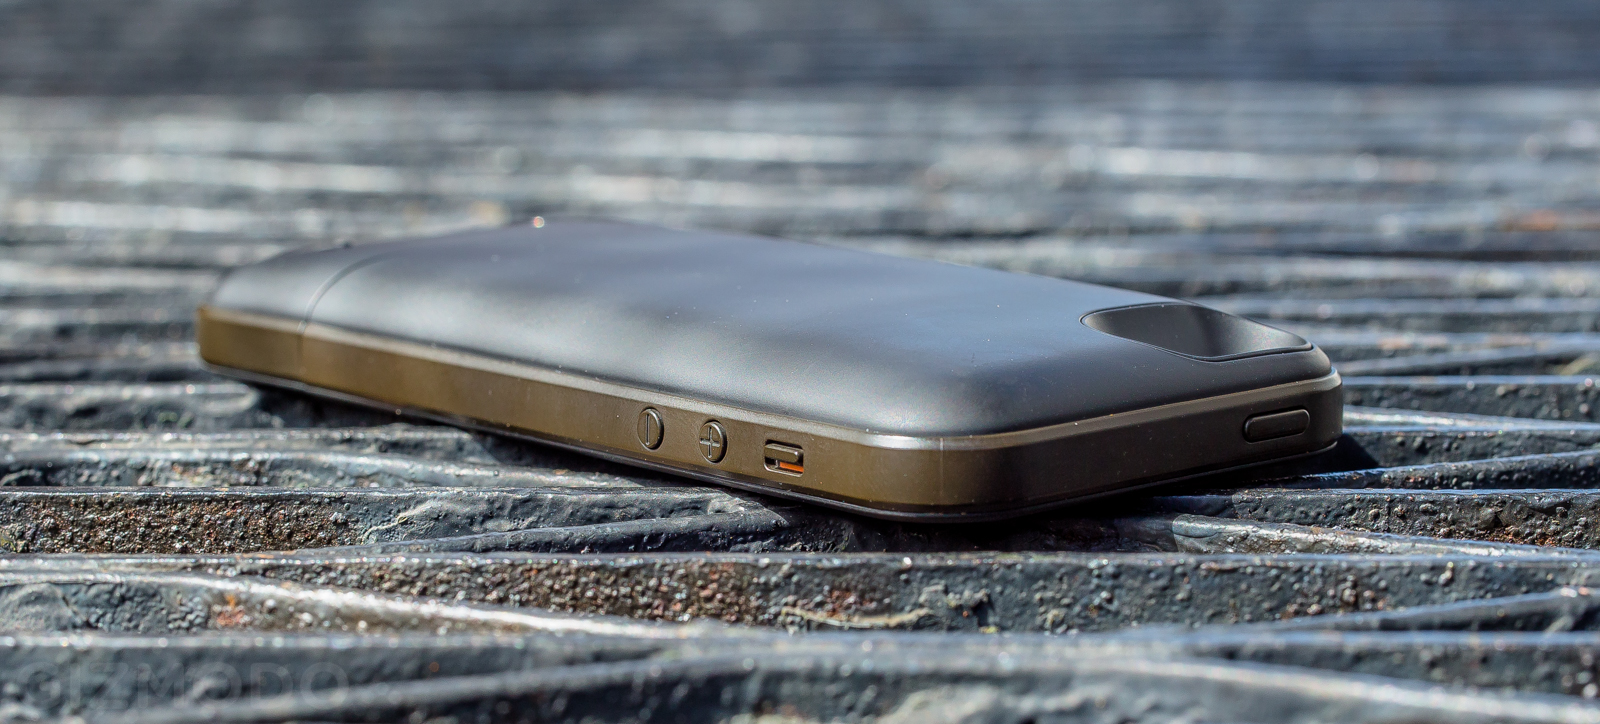 Mophie Space Pack Review: All The iPhone Storage You Need (Plus Bulk)